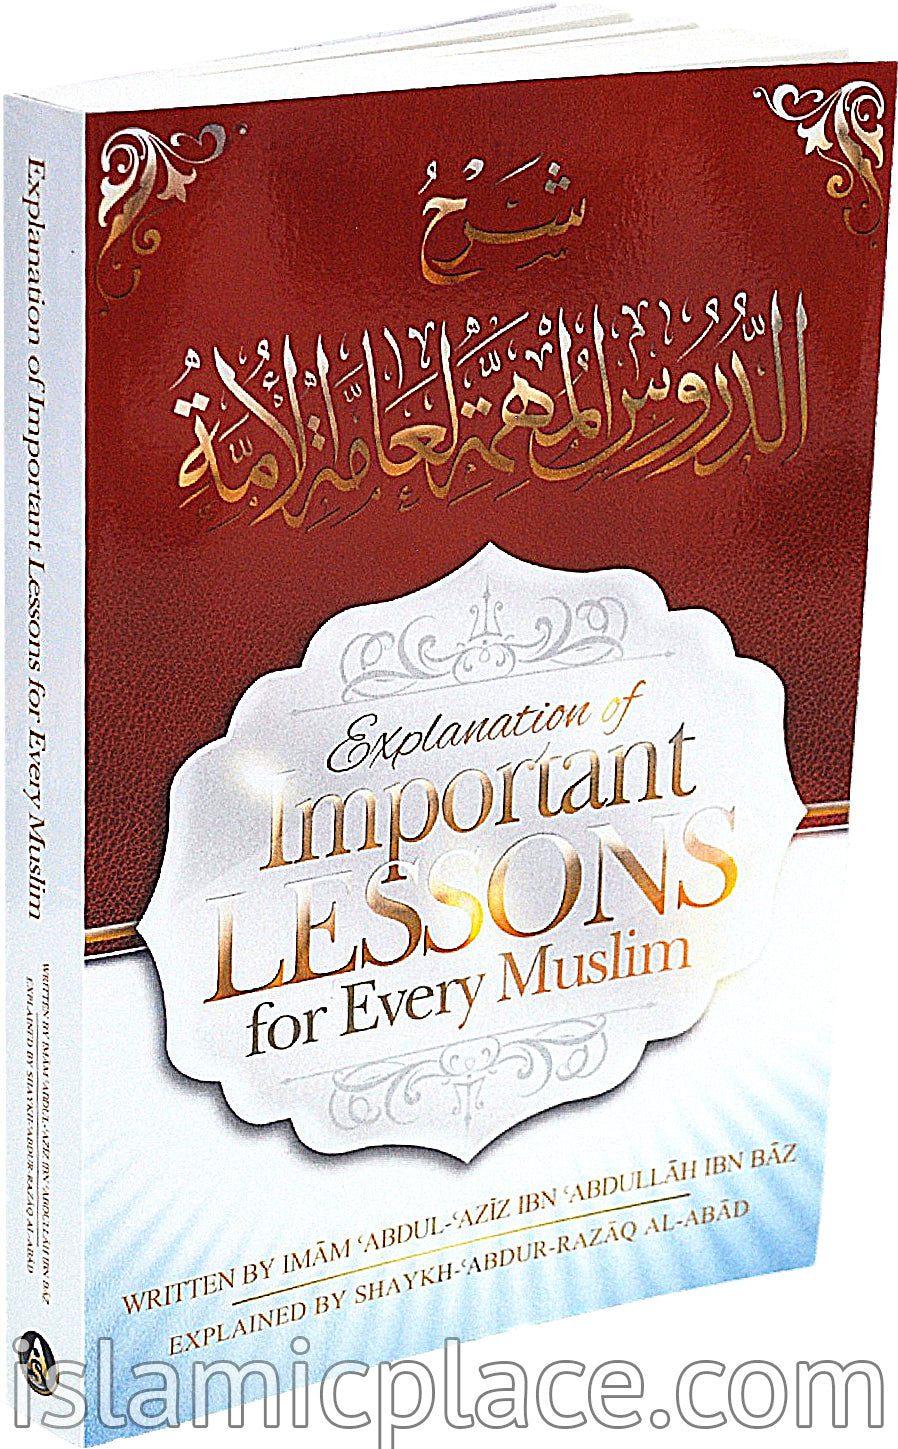 Explanation of Important Lessons for Every Muslim - Paperback (Explained by Abdur-Razaq Al-Abad)